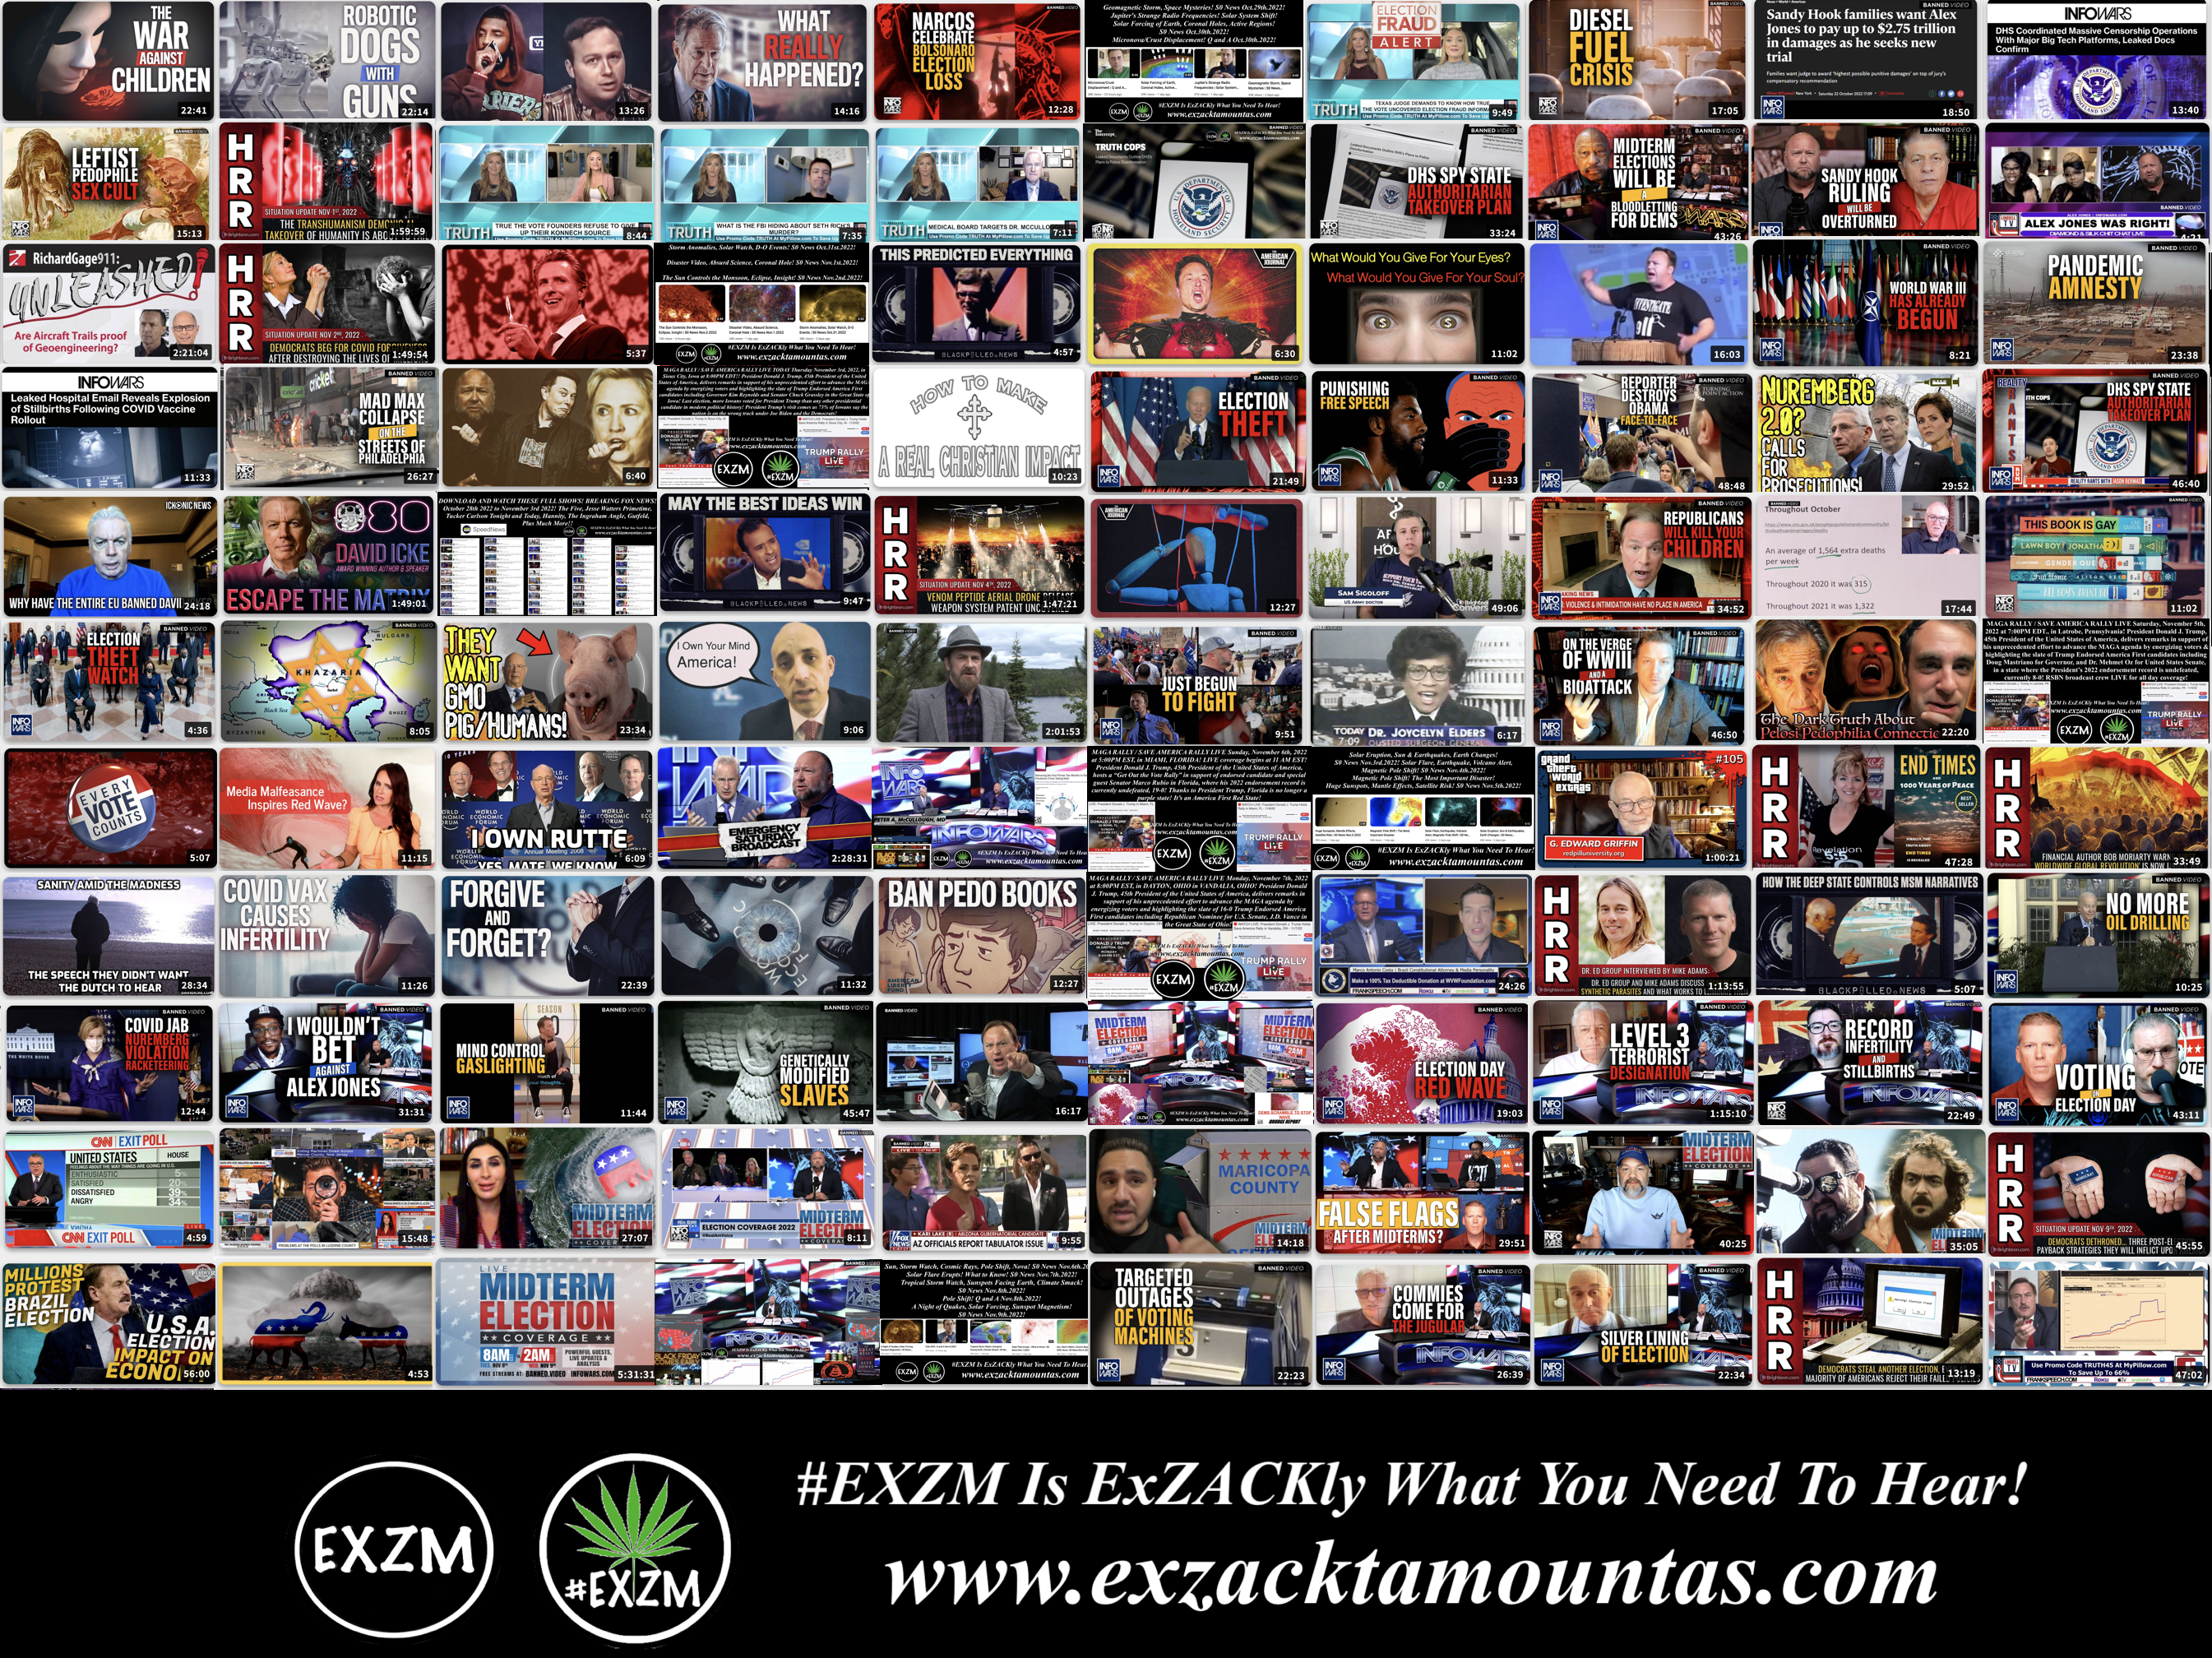 MOST WATCHED VIDEOS ON BANNED VIDEO DEEP STATE GLOBALISTS DEPOPULATION ELECTION FRAUD AND MUCH MORE EXZM Zack Mount November 9th 2022